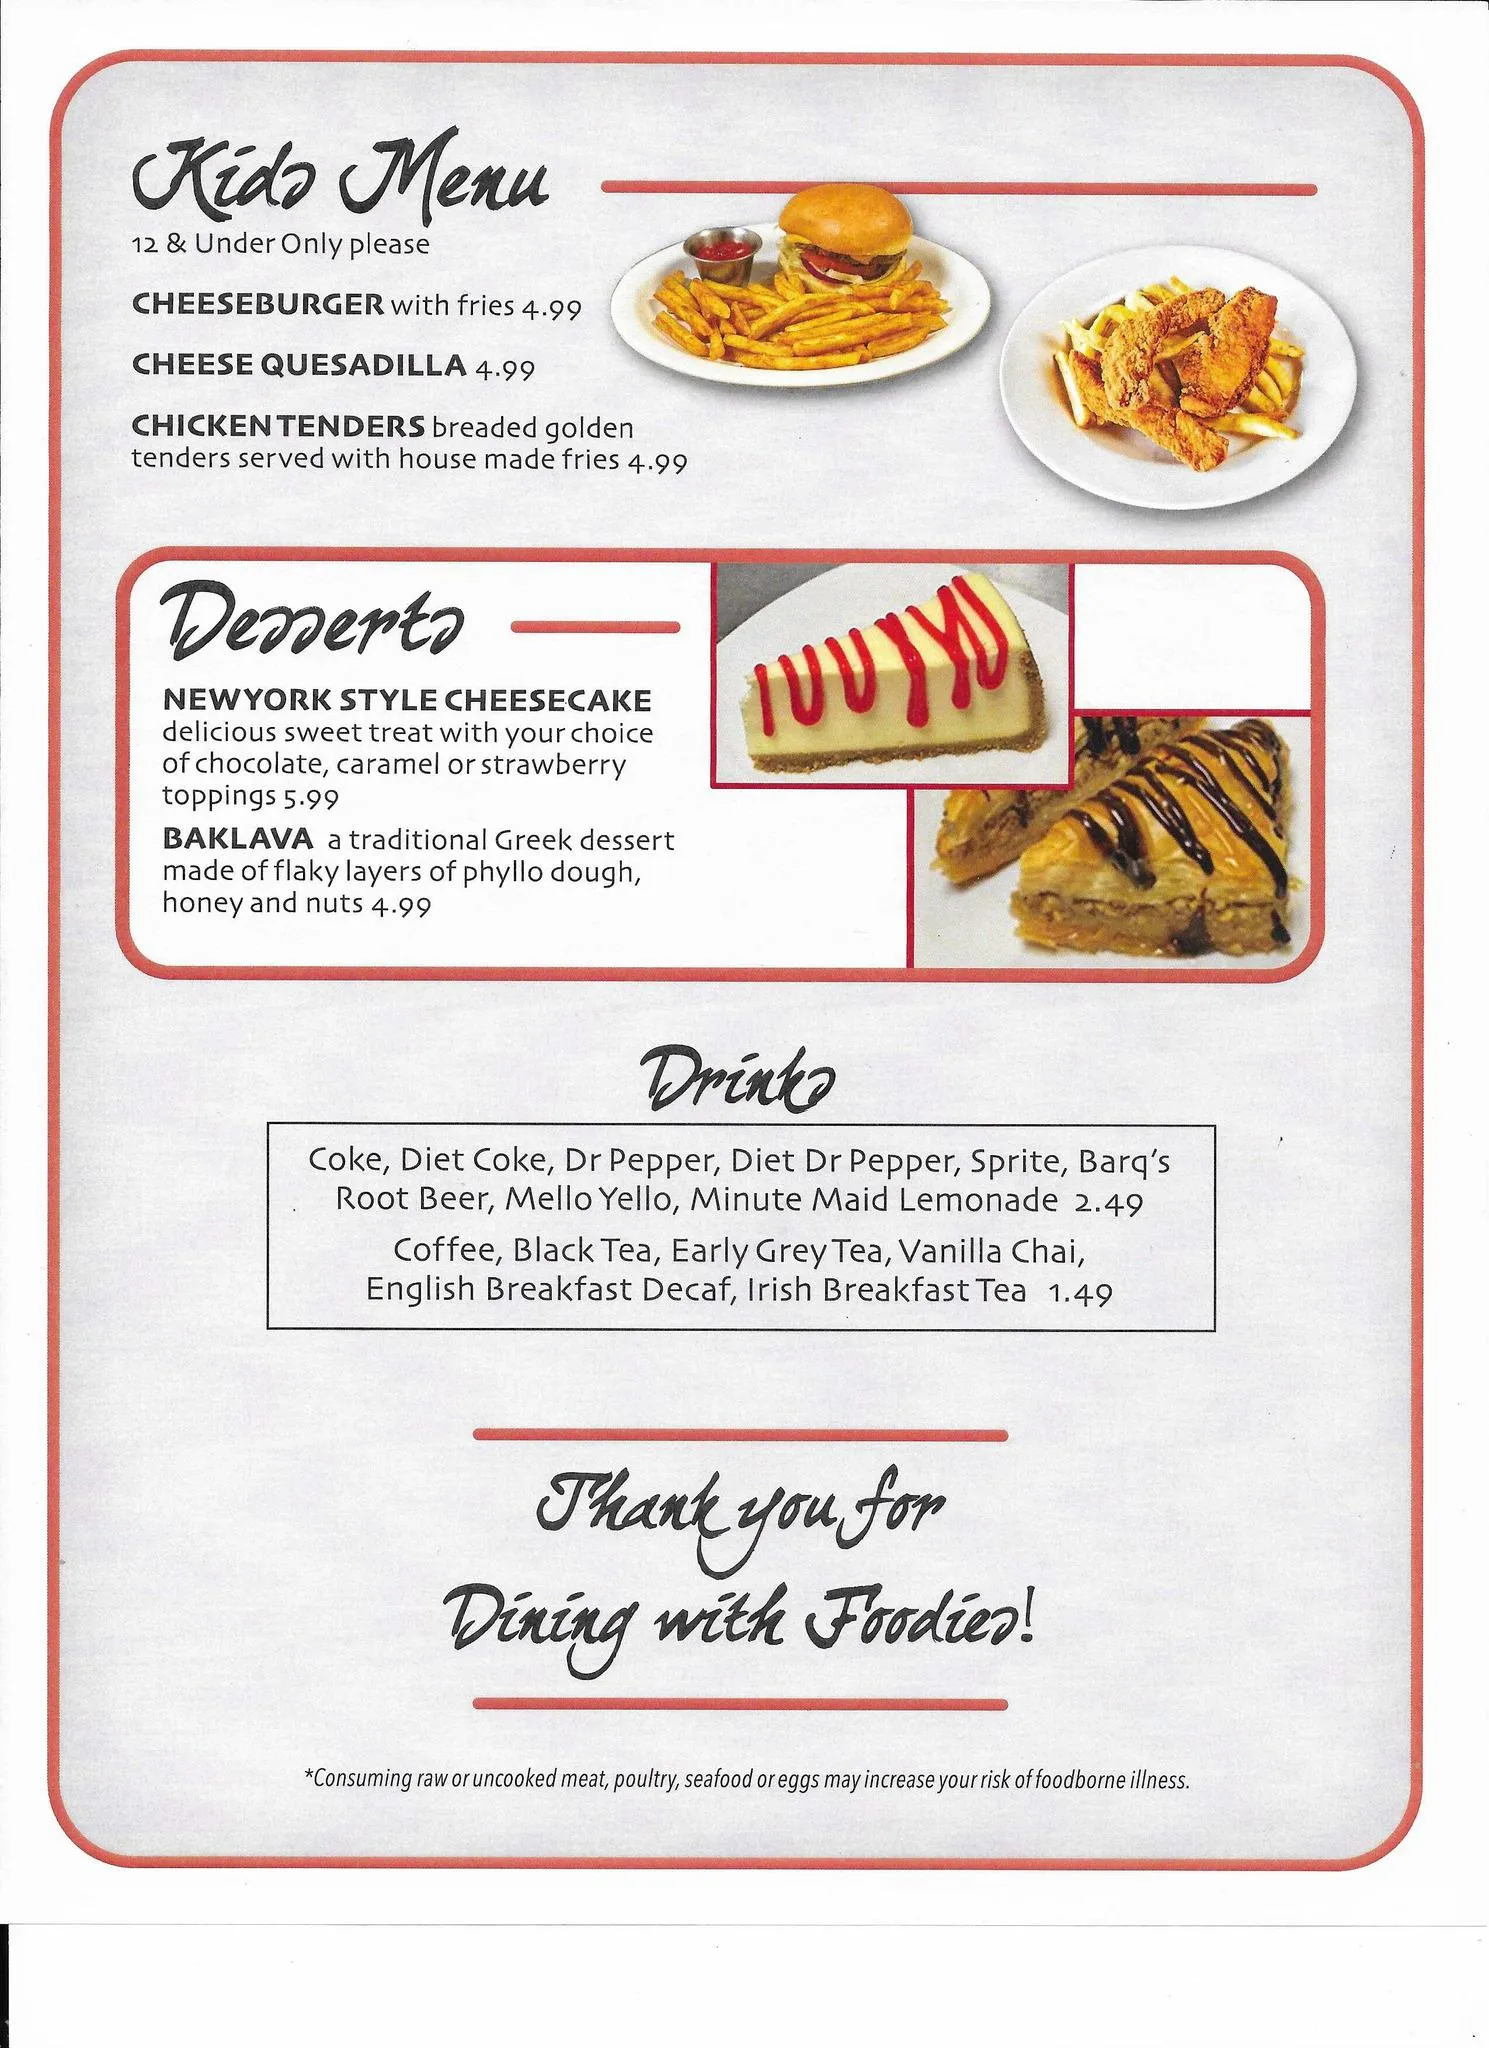 Foodies Restaurant and Grill kids menu page.